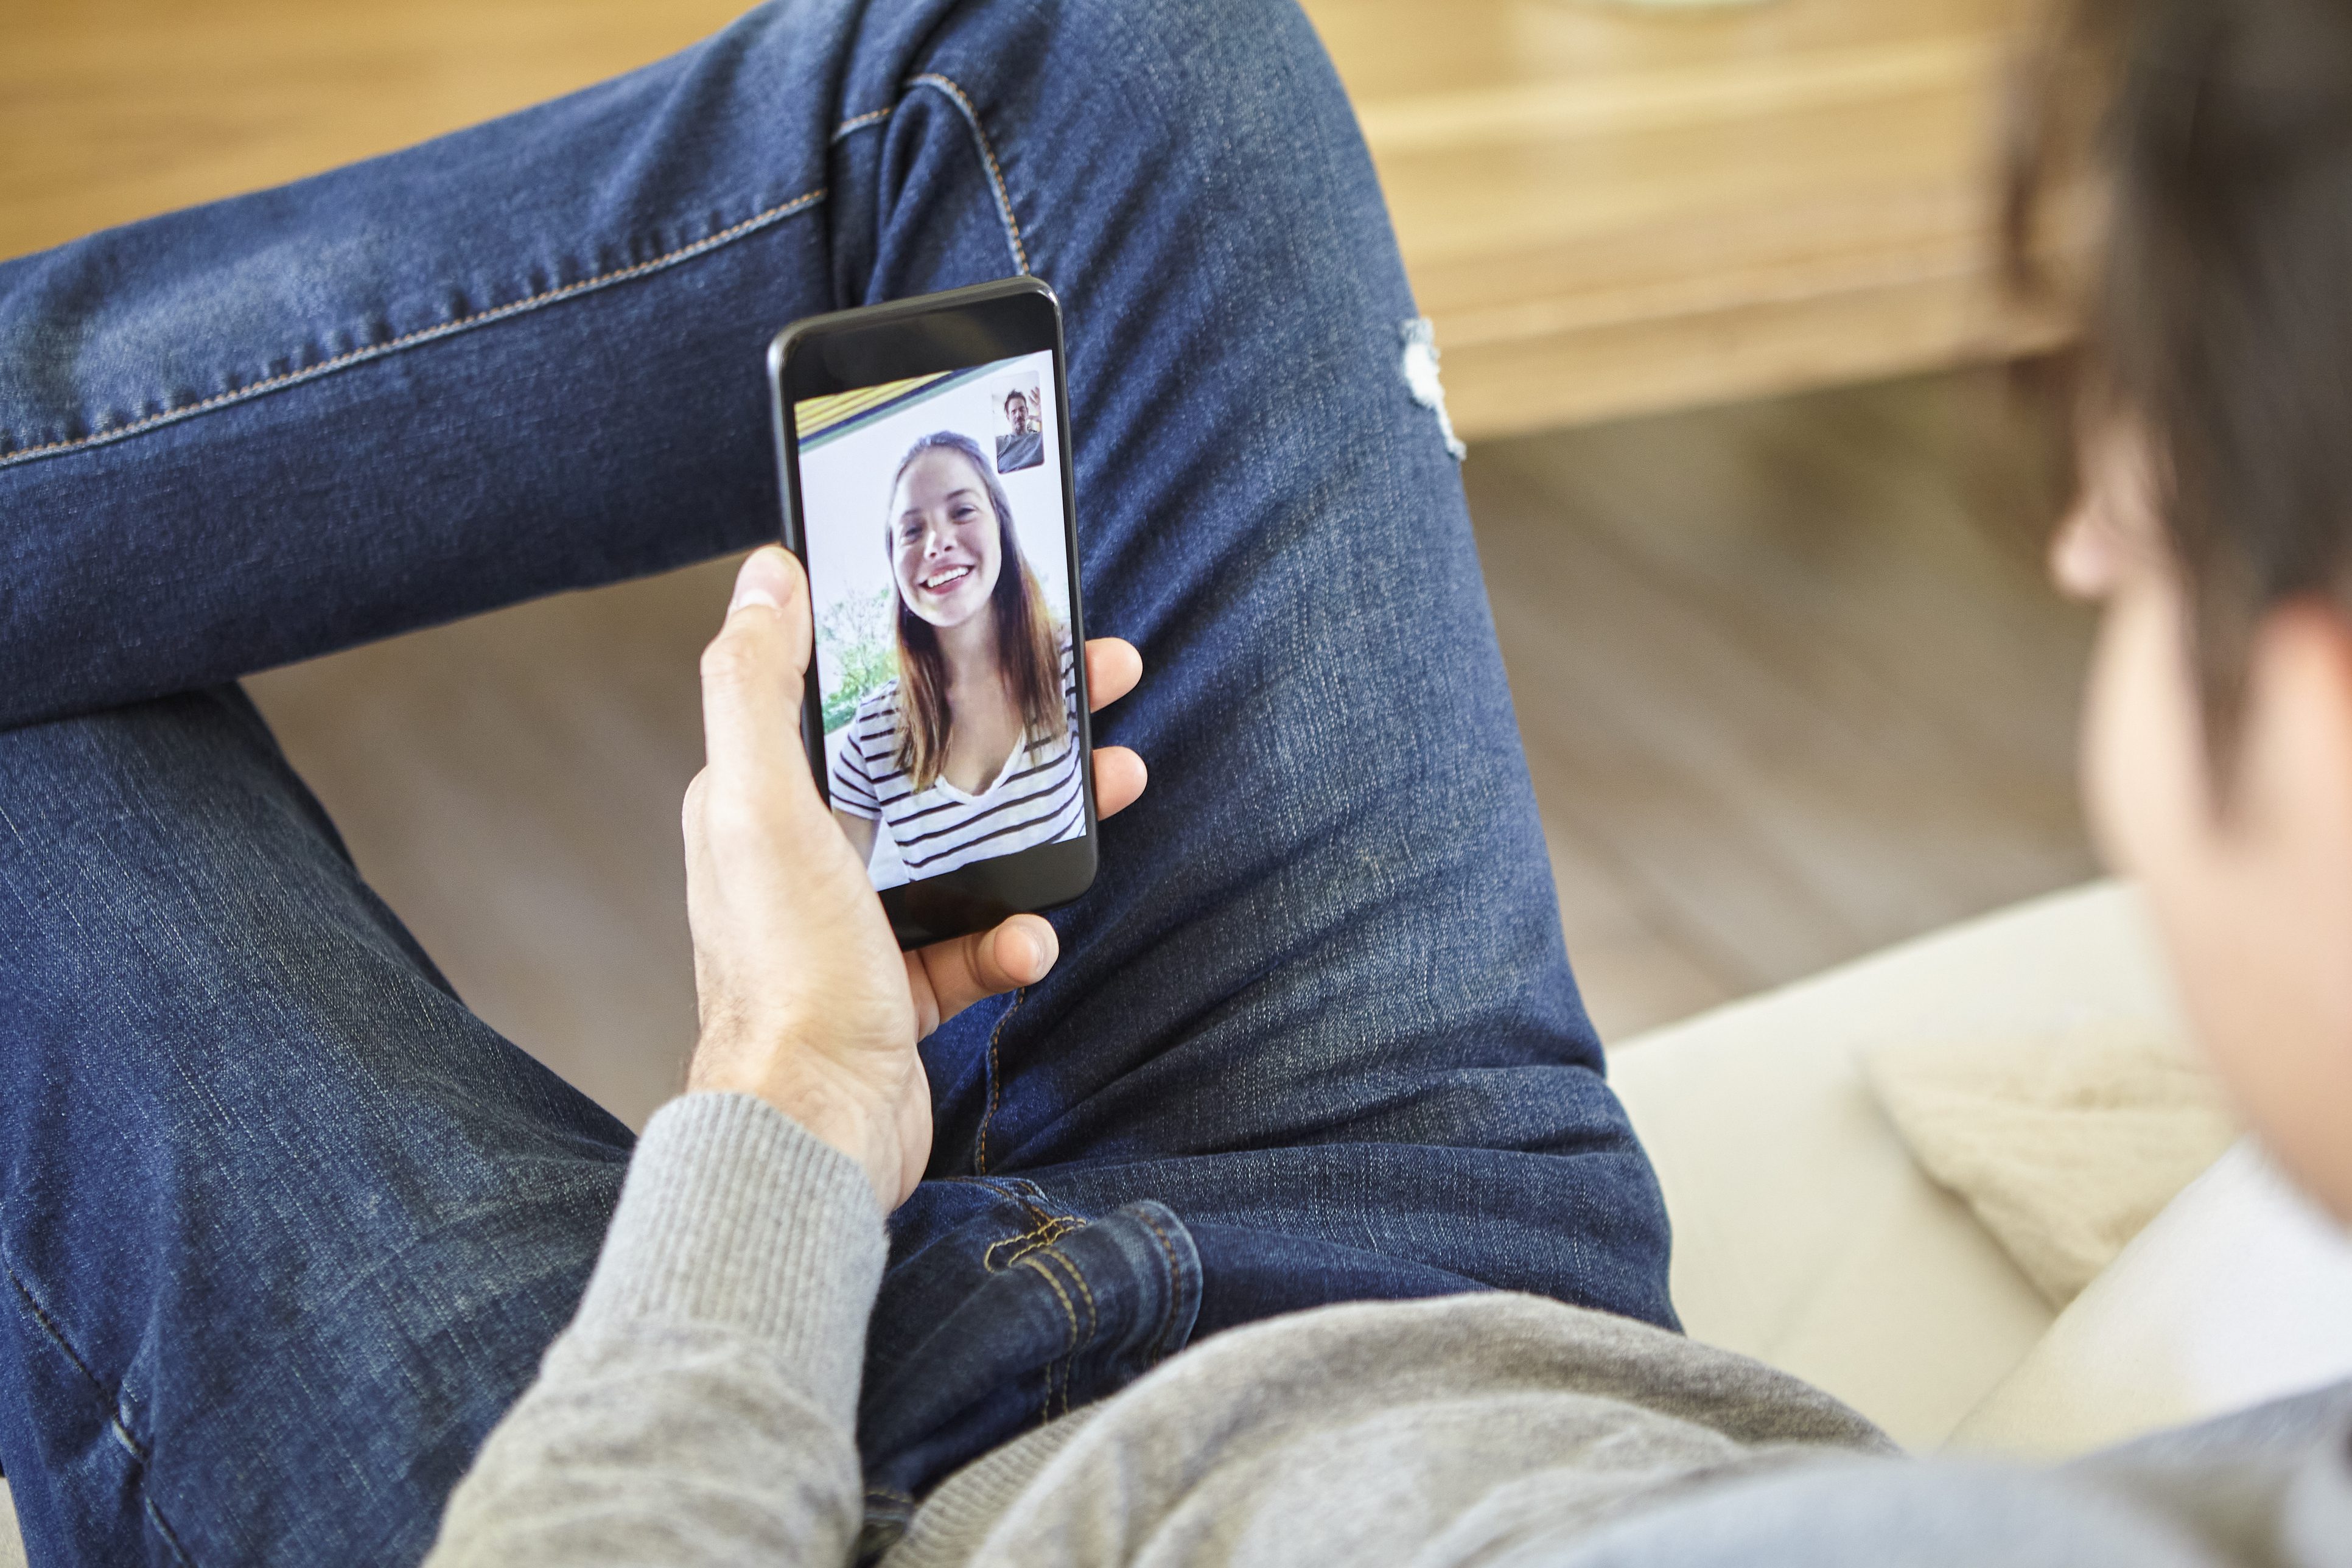 Online Dating: Is It A Good Sign If A FaceTime Date Lasts For 9 Hours?